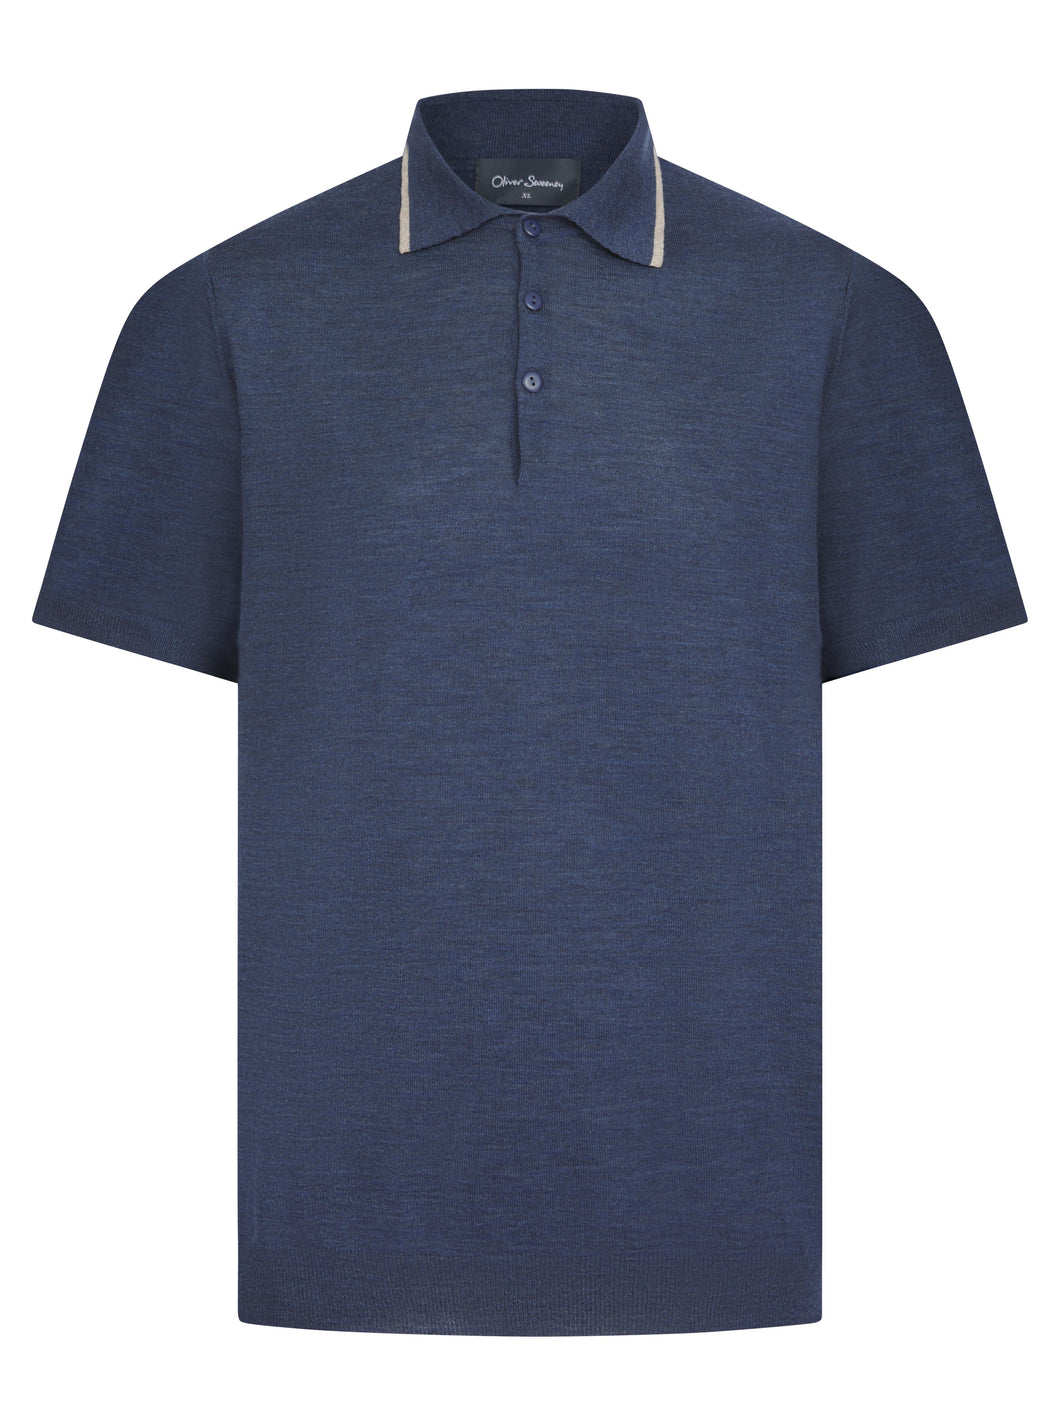 Oliver Sweeney Covehithe Tipped Polo Denim